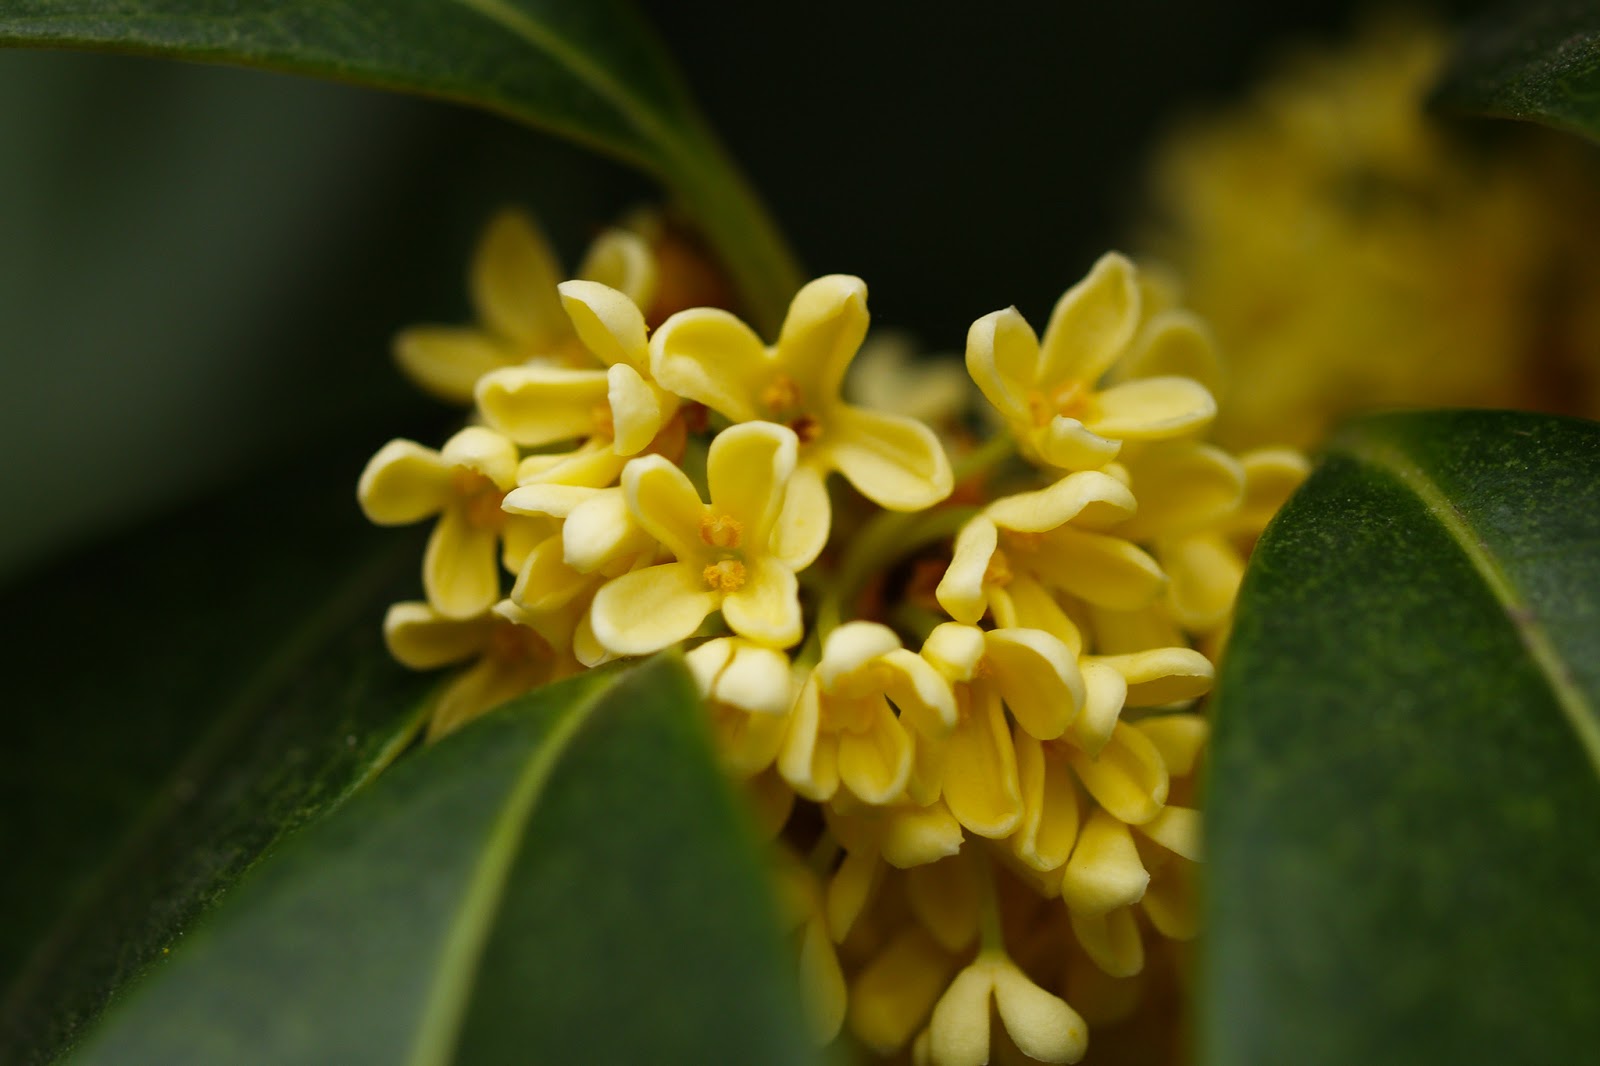 sweet olive flower - small yellow petals